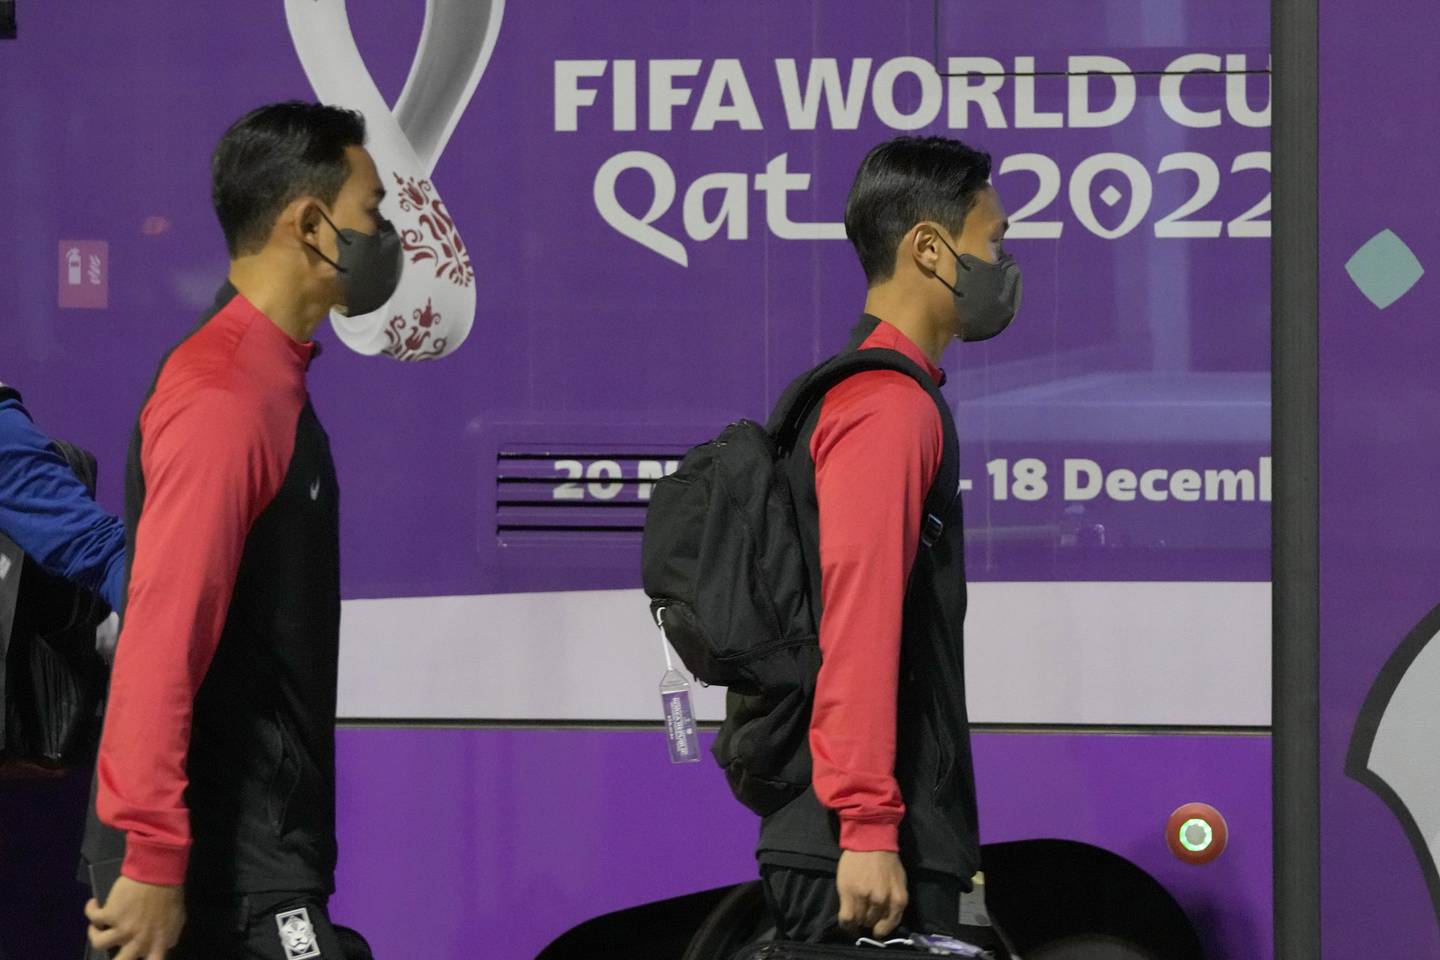 Members of the South Korean national soccer team arrive at Hamad International airport in Doha, Qatar, on Nov. 14, 2022.